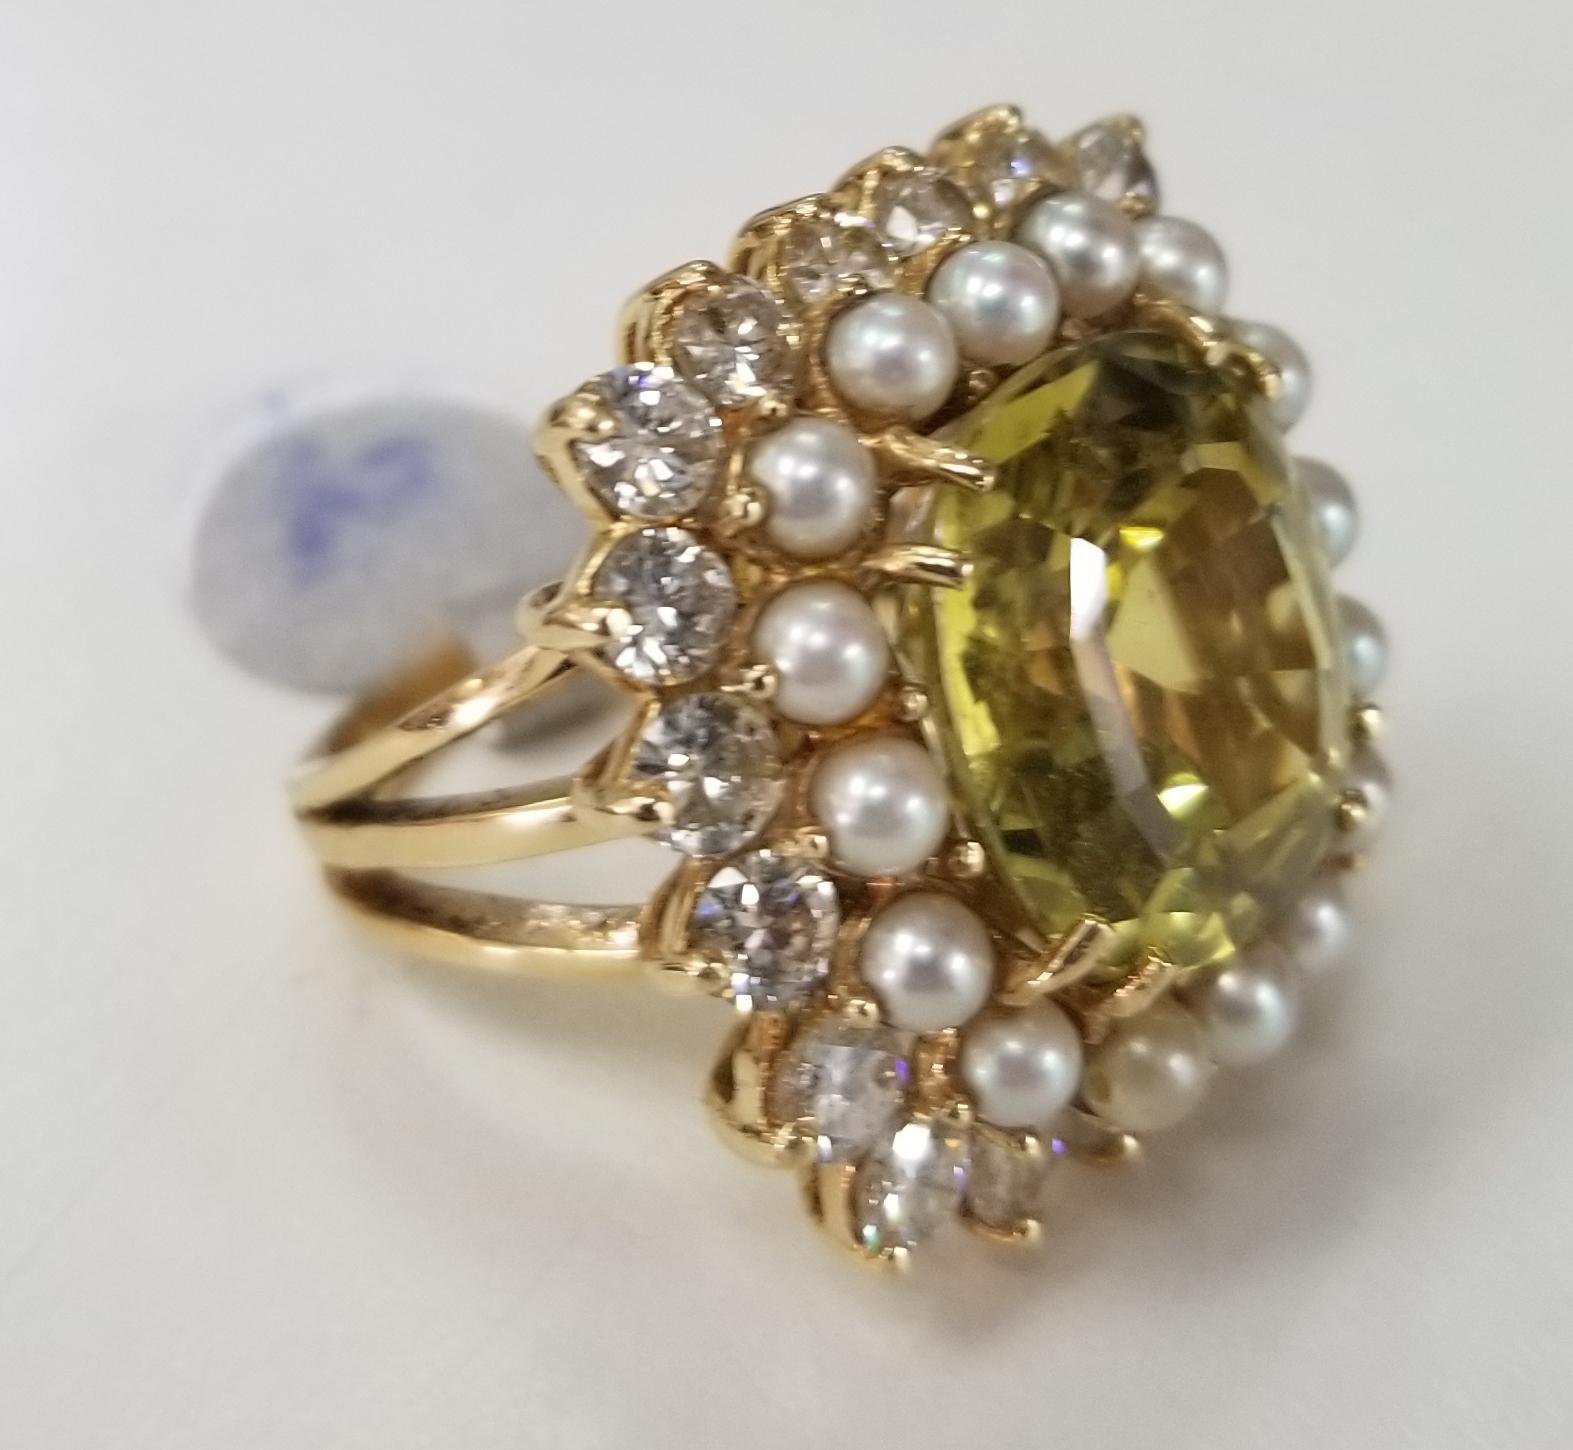 AGL Certified Natural  Chrysoberyl pearl and diamond ring, containing 1 Natural  Chrysoberyl (measurements 13.97 x 13.20 x 7.86mm)  surrounded by 16 3mm pearls and 20 round full cut diamonds of very fine quality weighing approx. 4.00cts